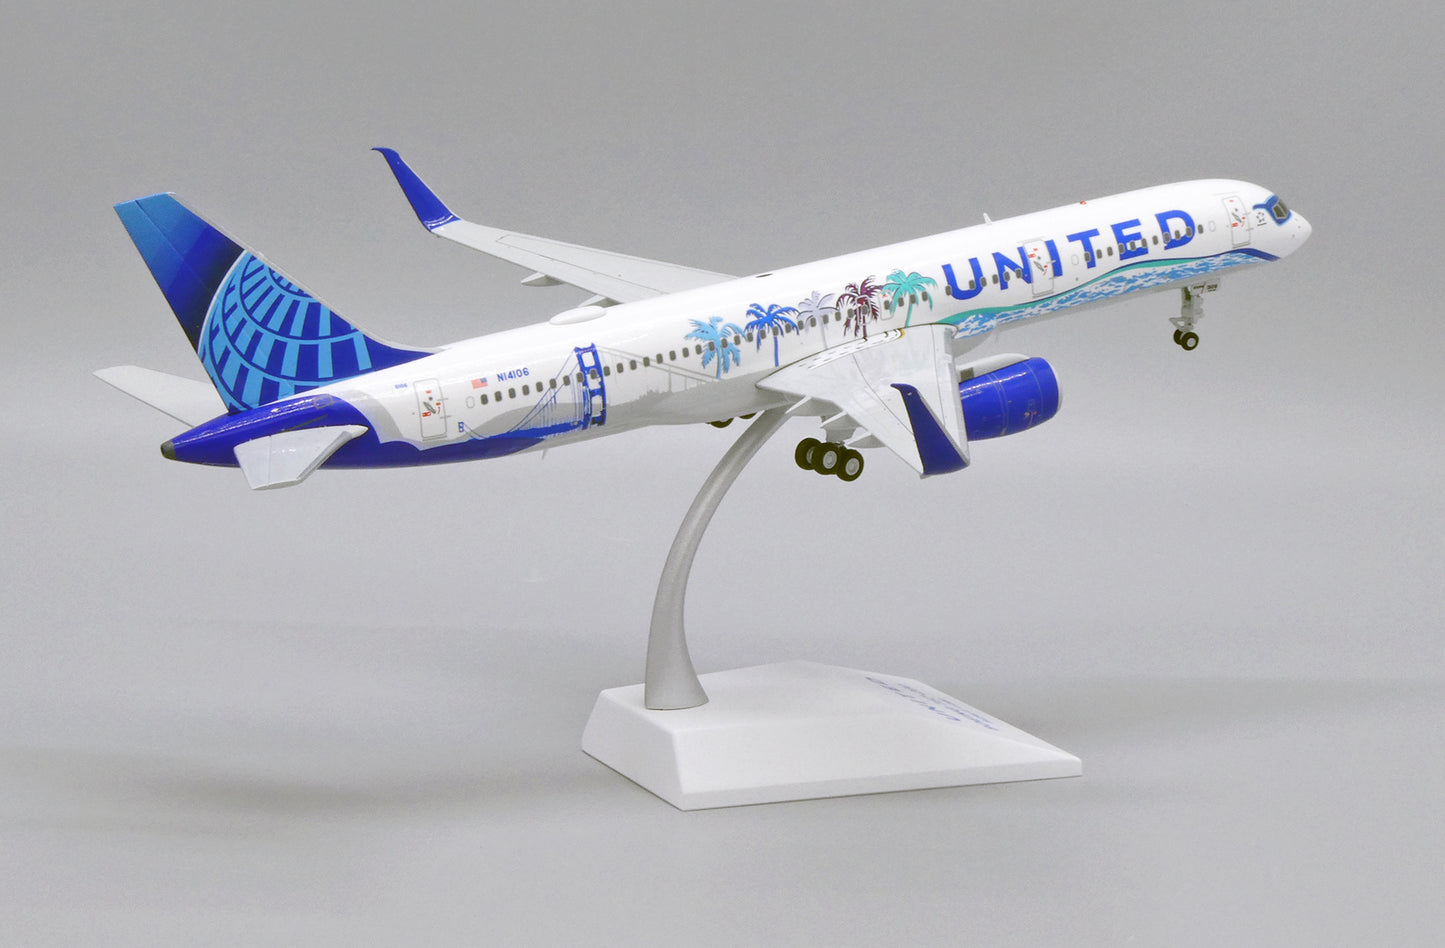 1:200 JC Wings United Airlines 757-200 "Her Art Here California" N14106 LH2268 Officially Licensed w/ Stand